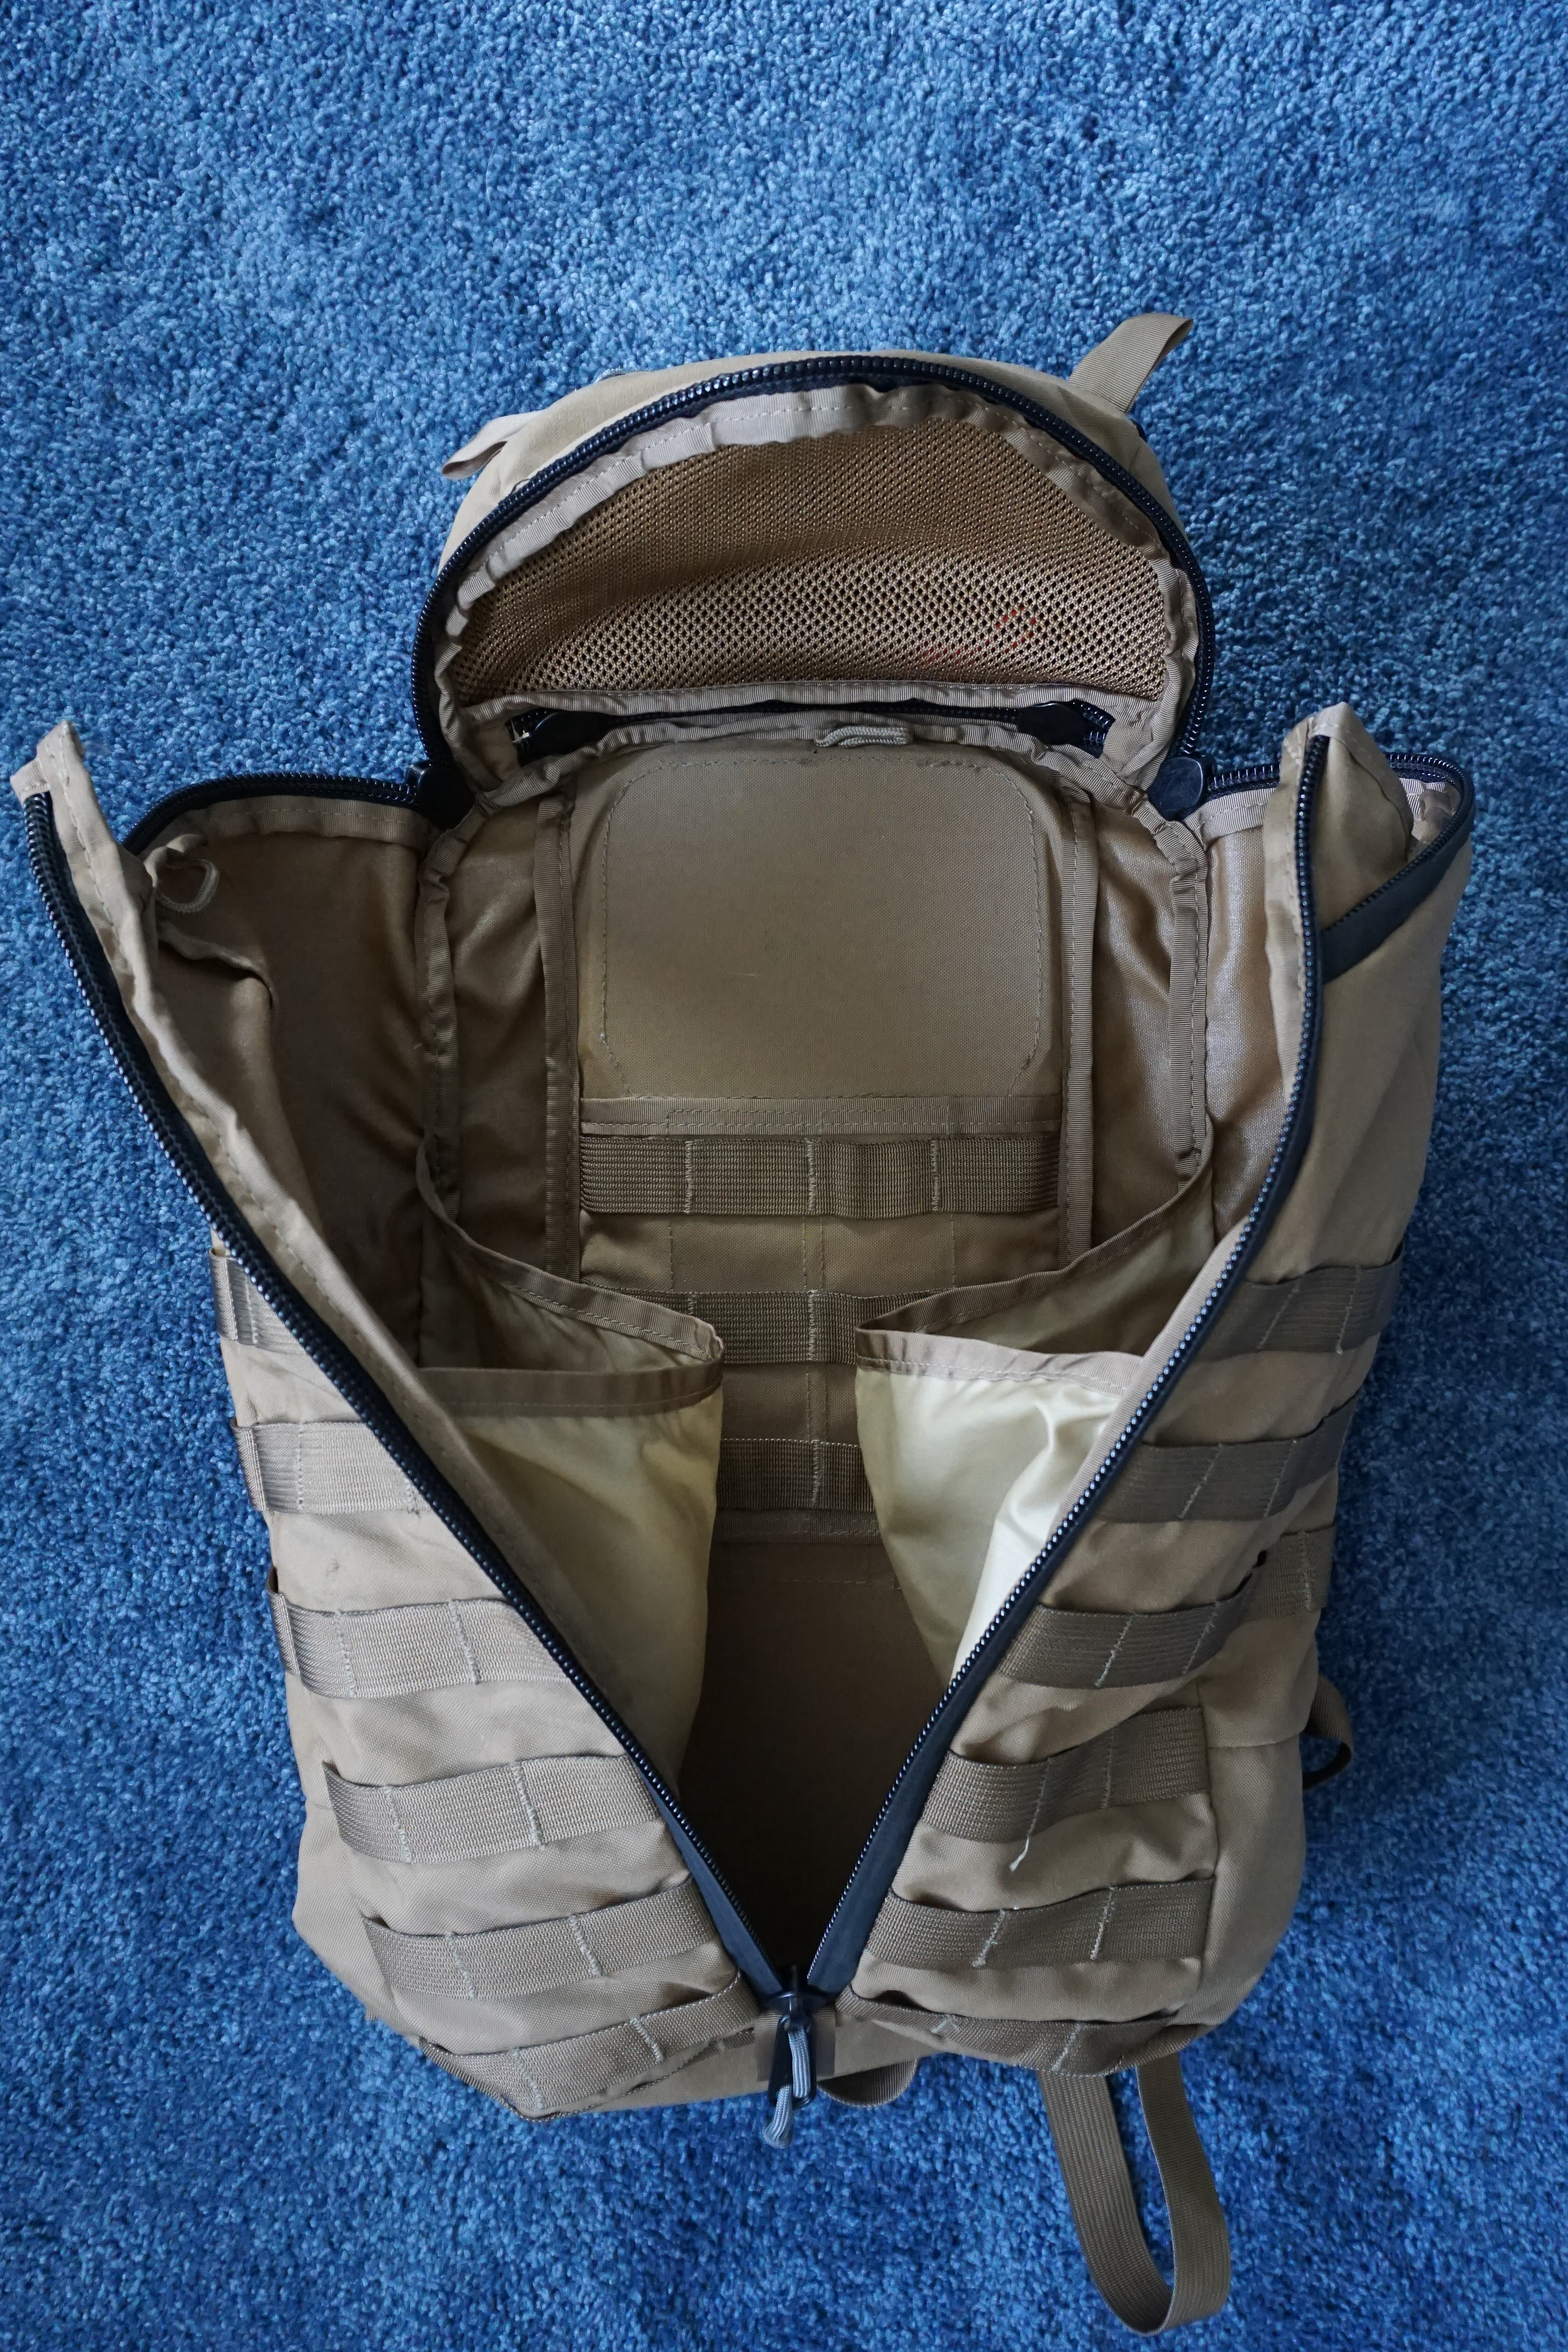 Mystery Ranch ASAP backpack review main compartment empty